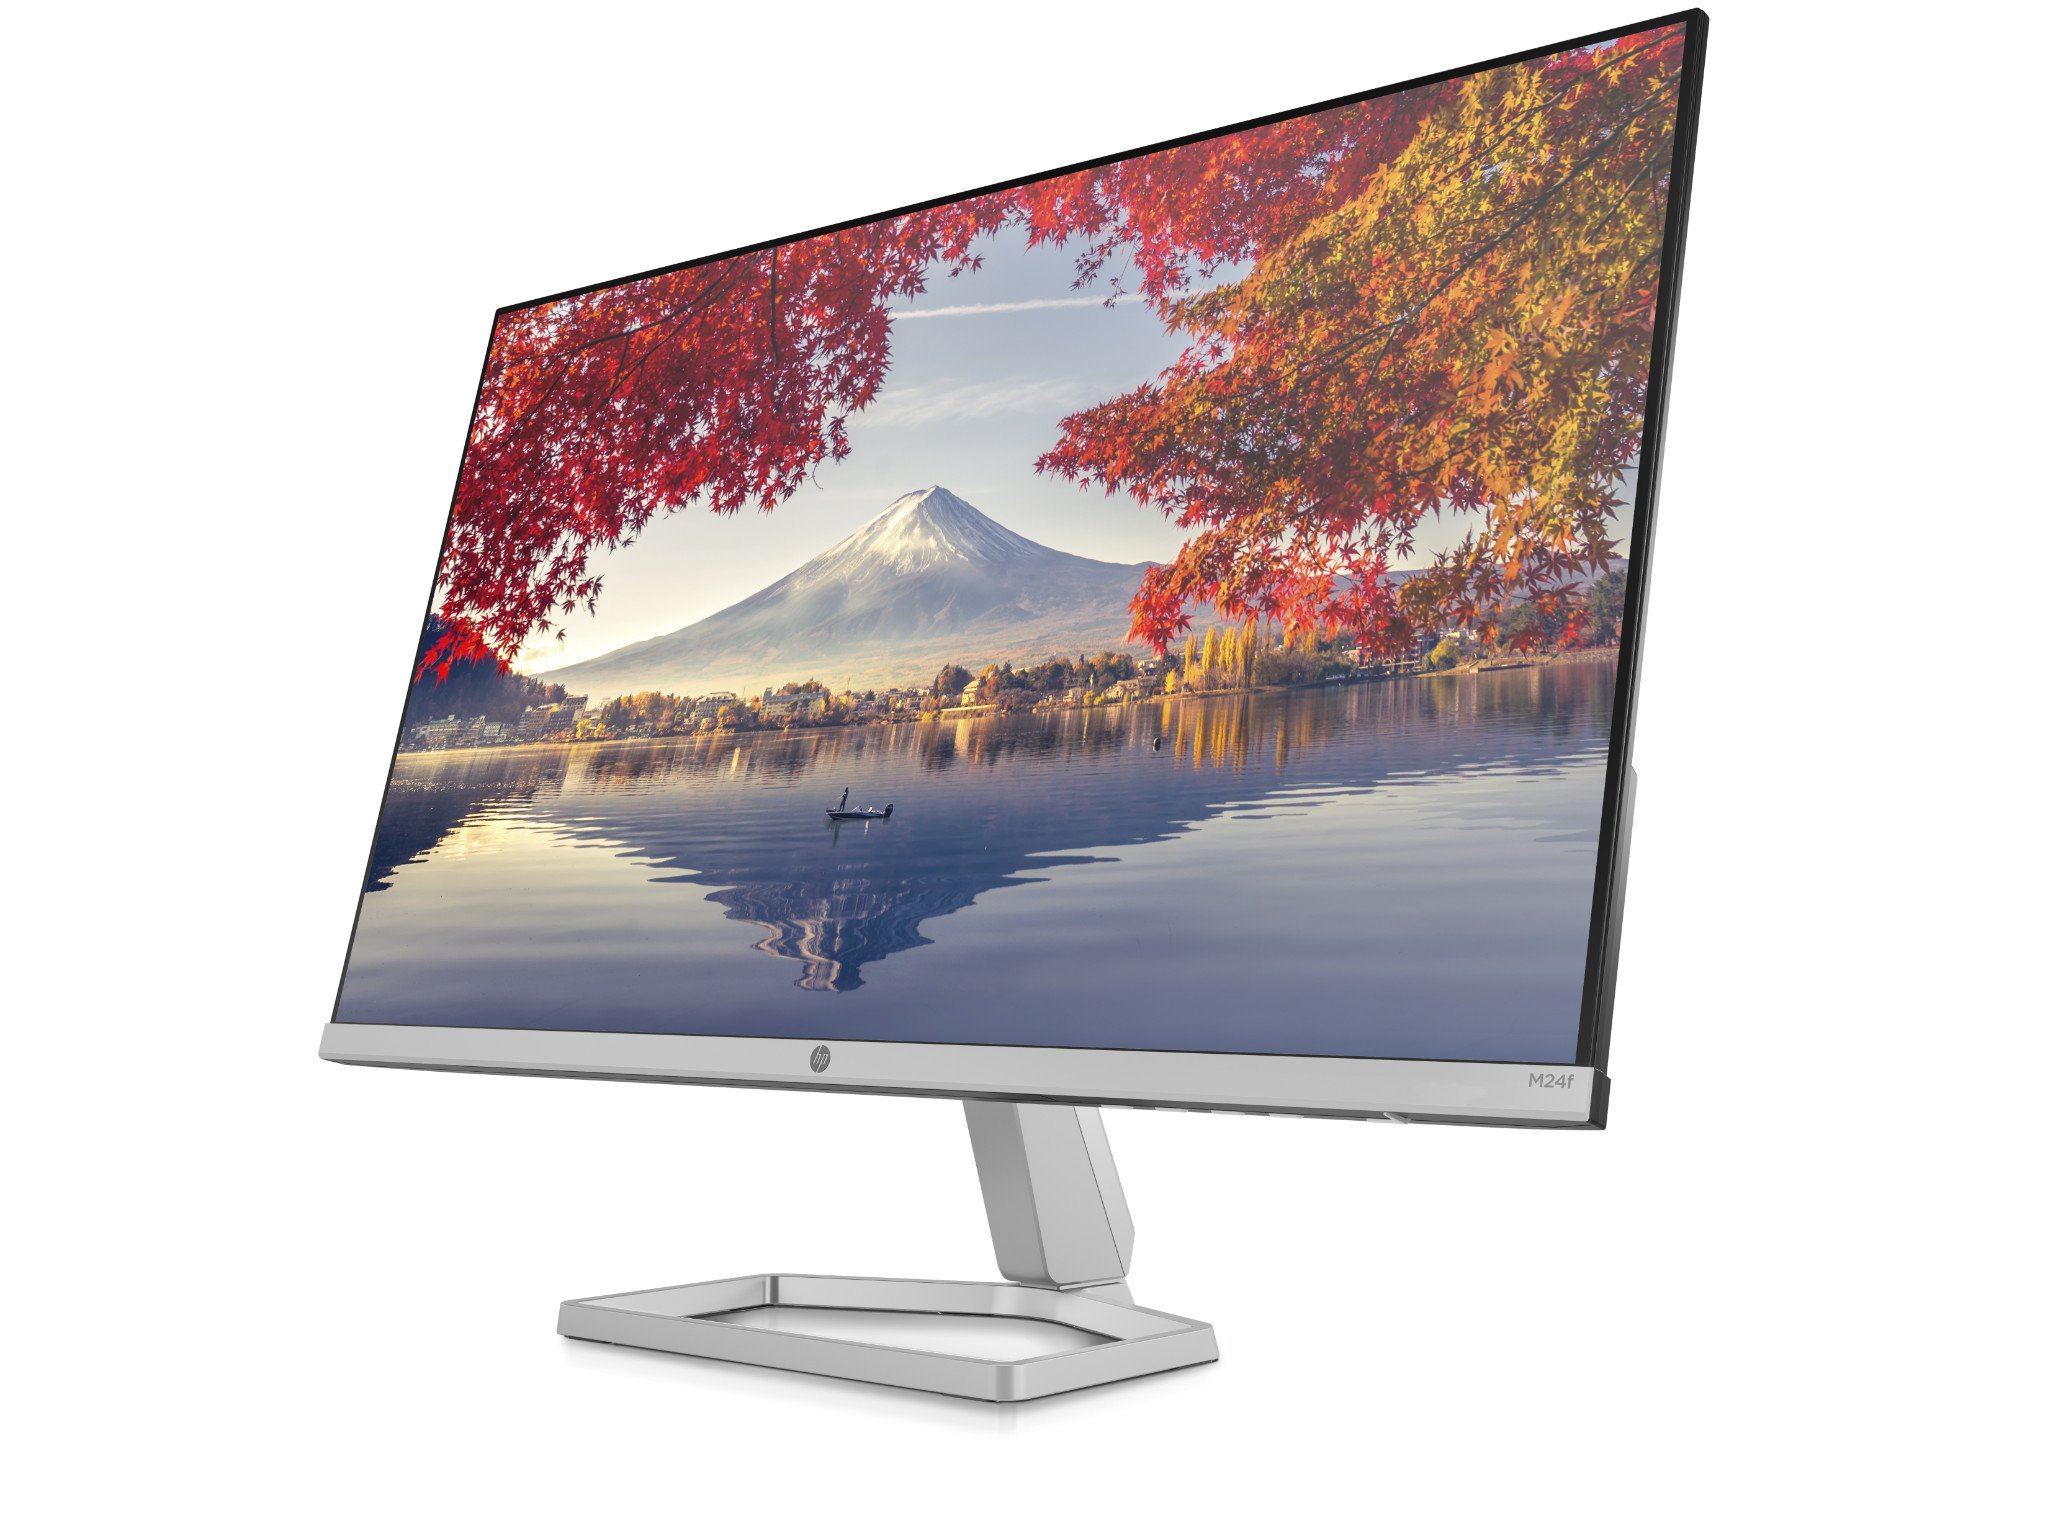 HP's new M-Series monitors filter out blue light but leave your